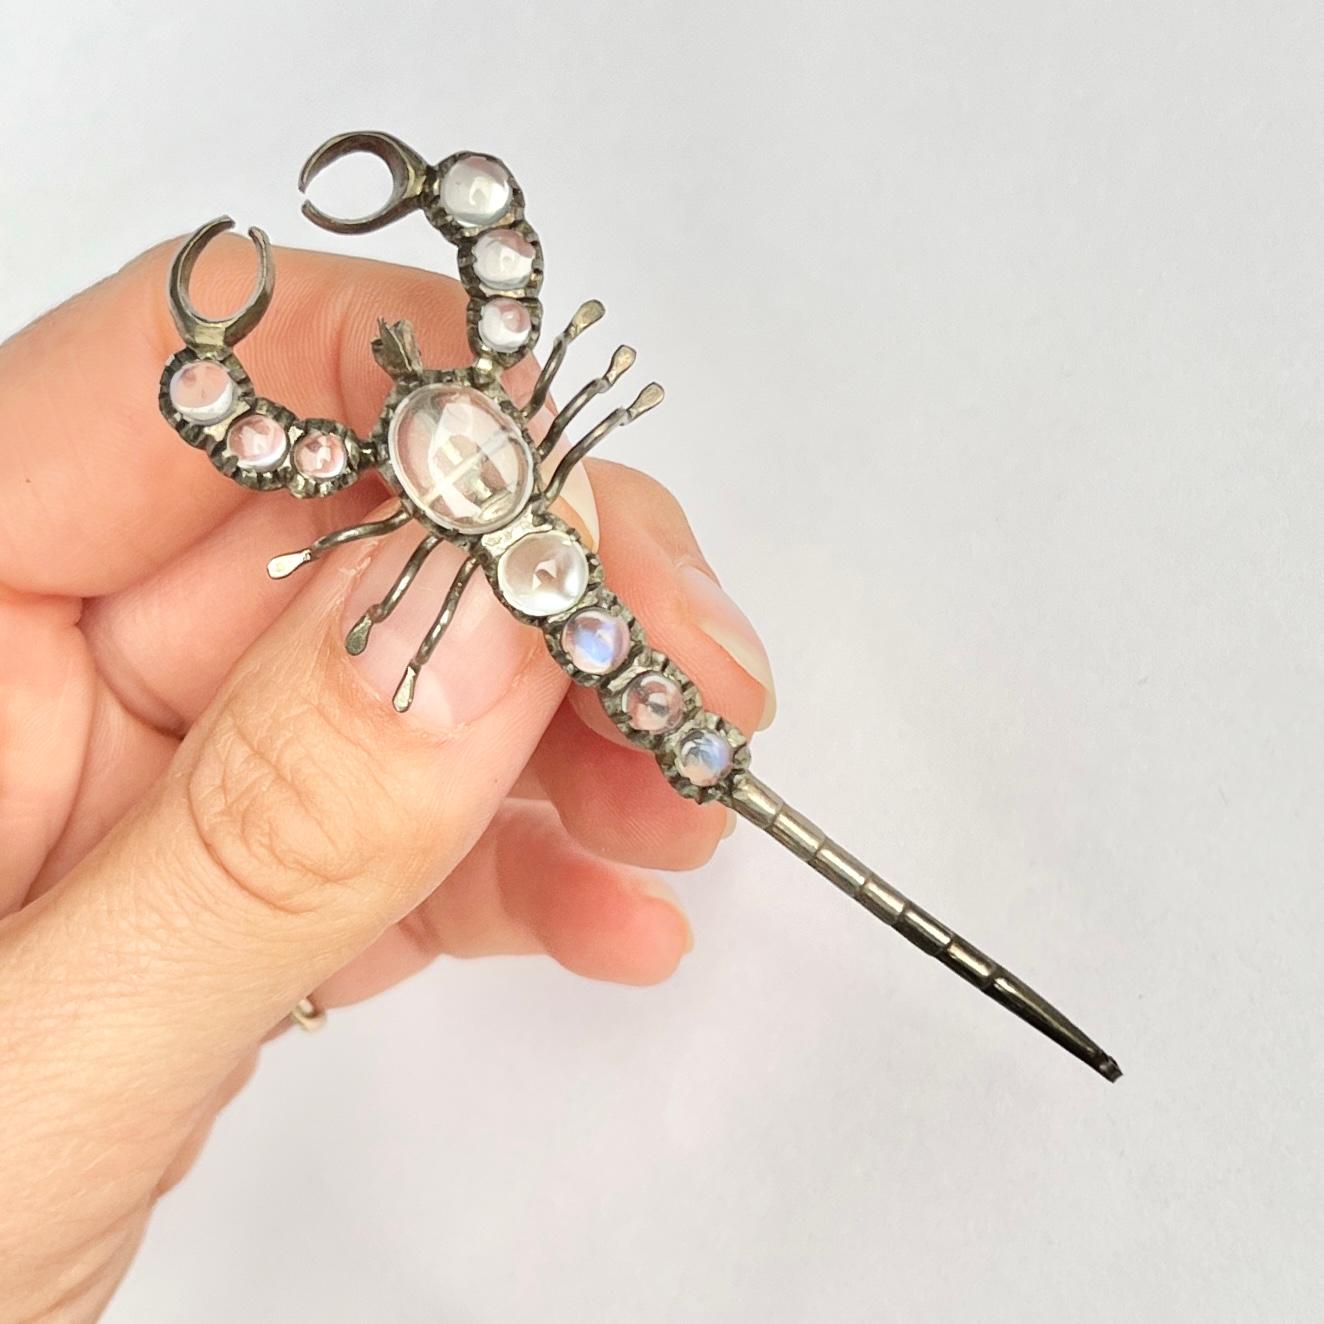 Vintage Silver and Moonstone Scorpion Brooch In Good Condition For Sale In Chipping Campden, GB